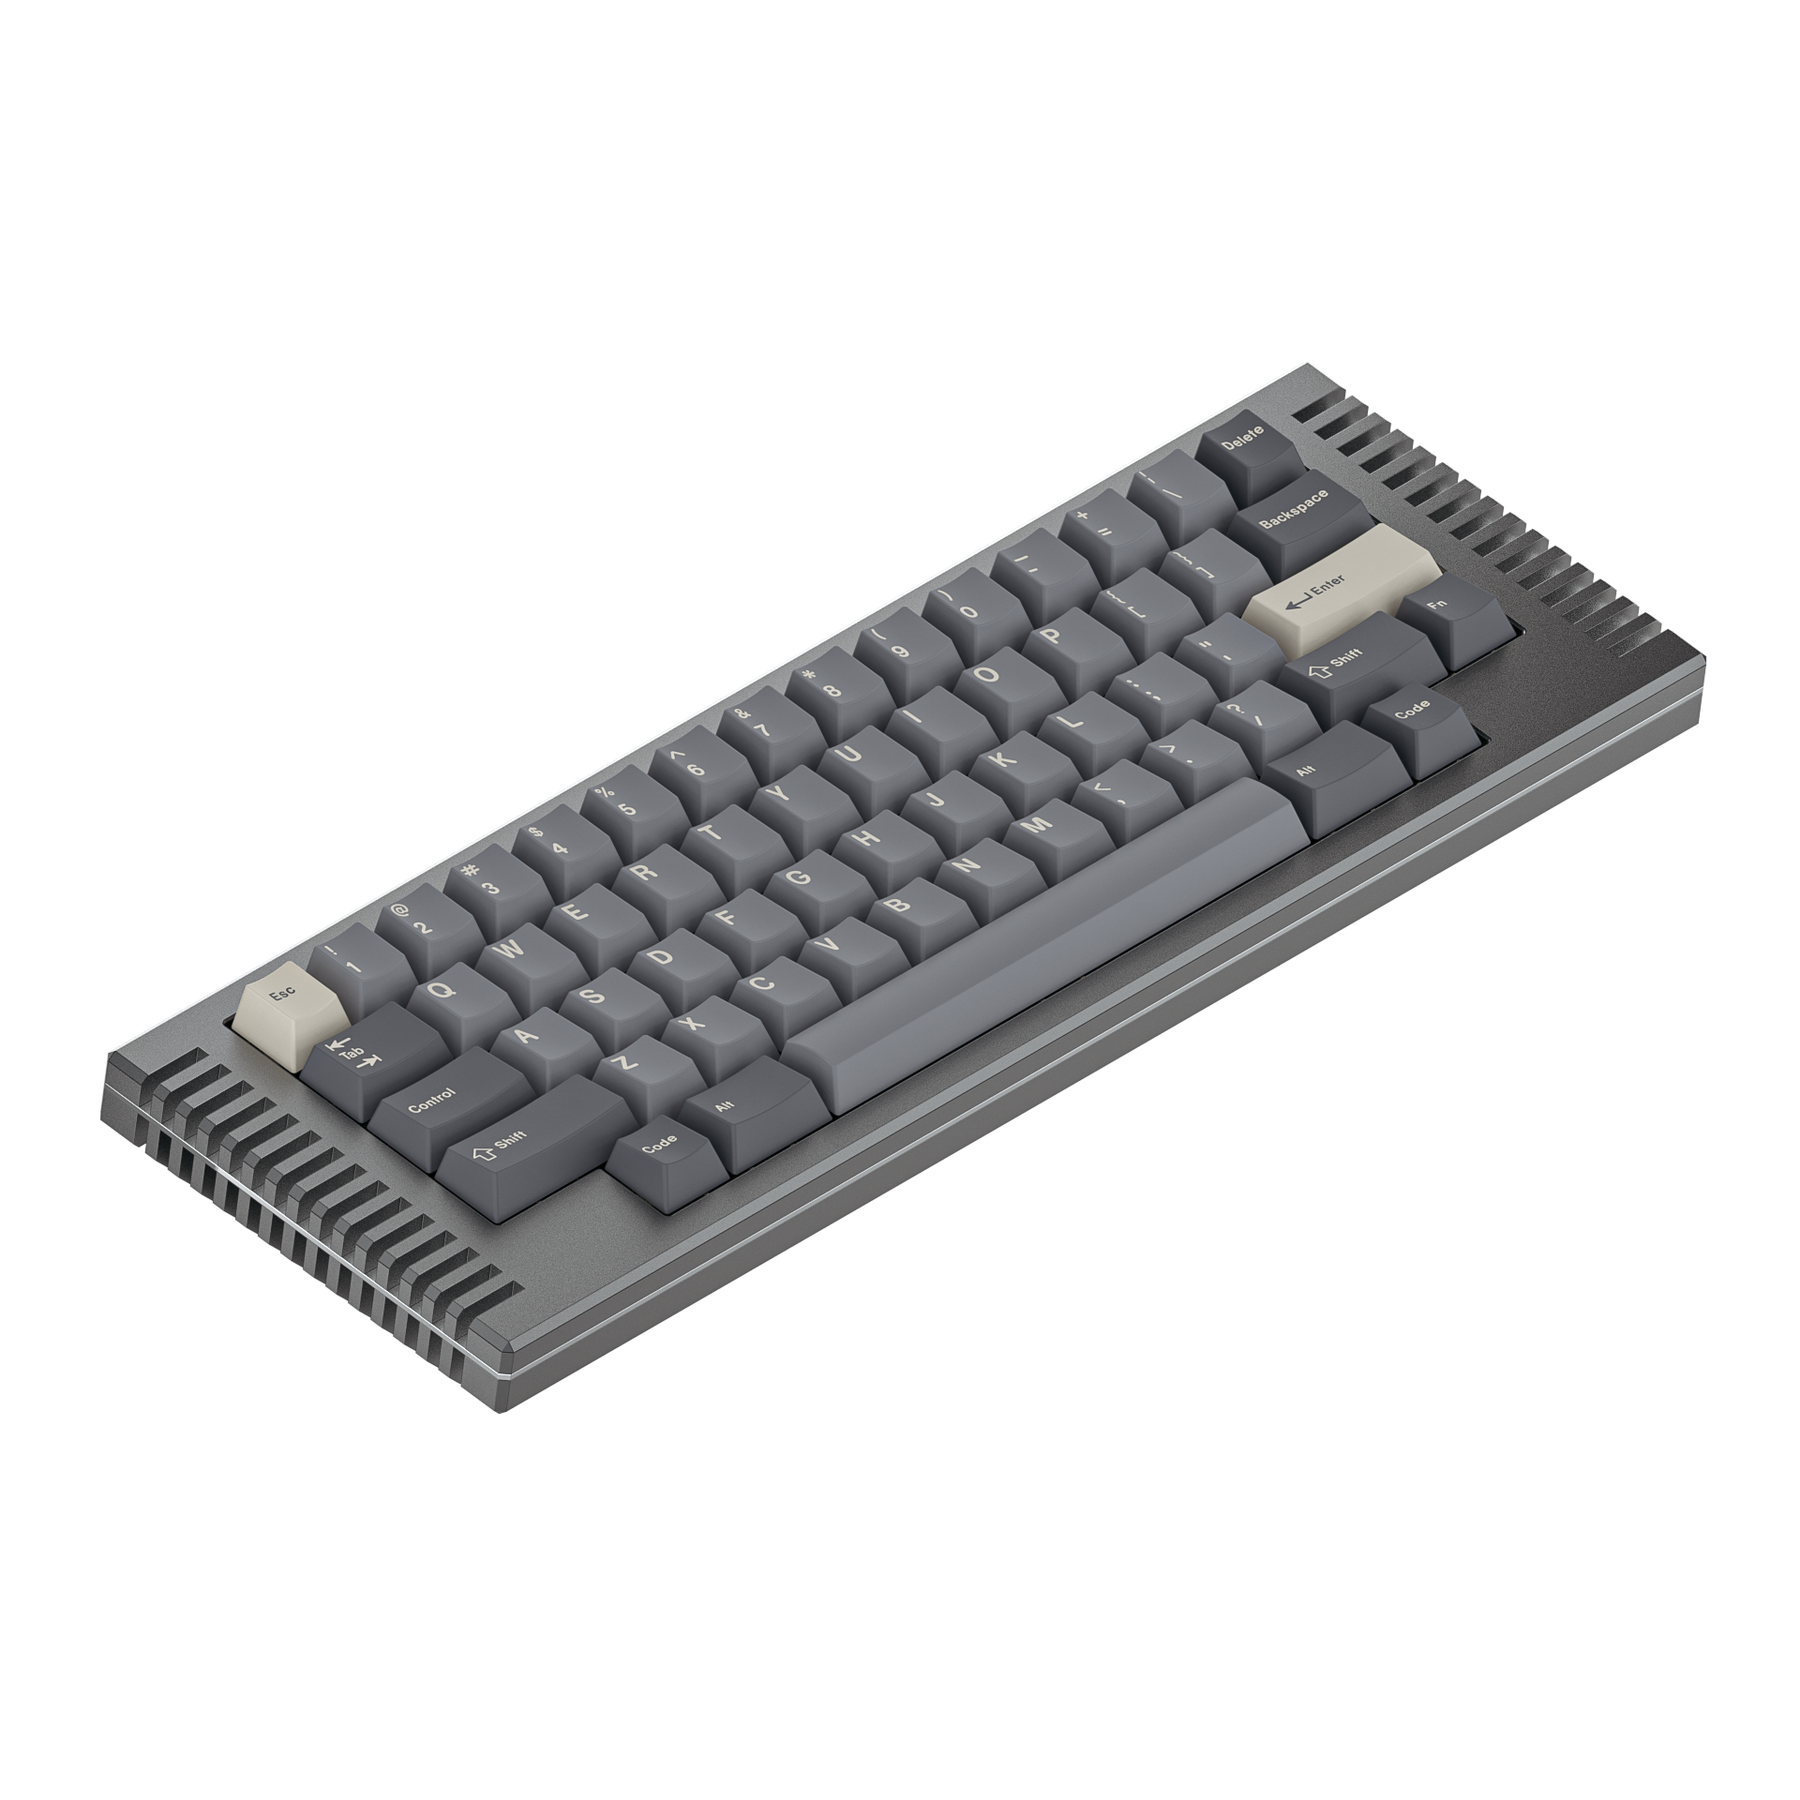 THERMAL SEQ2 Keyboard – Extras